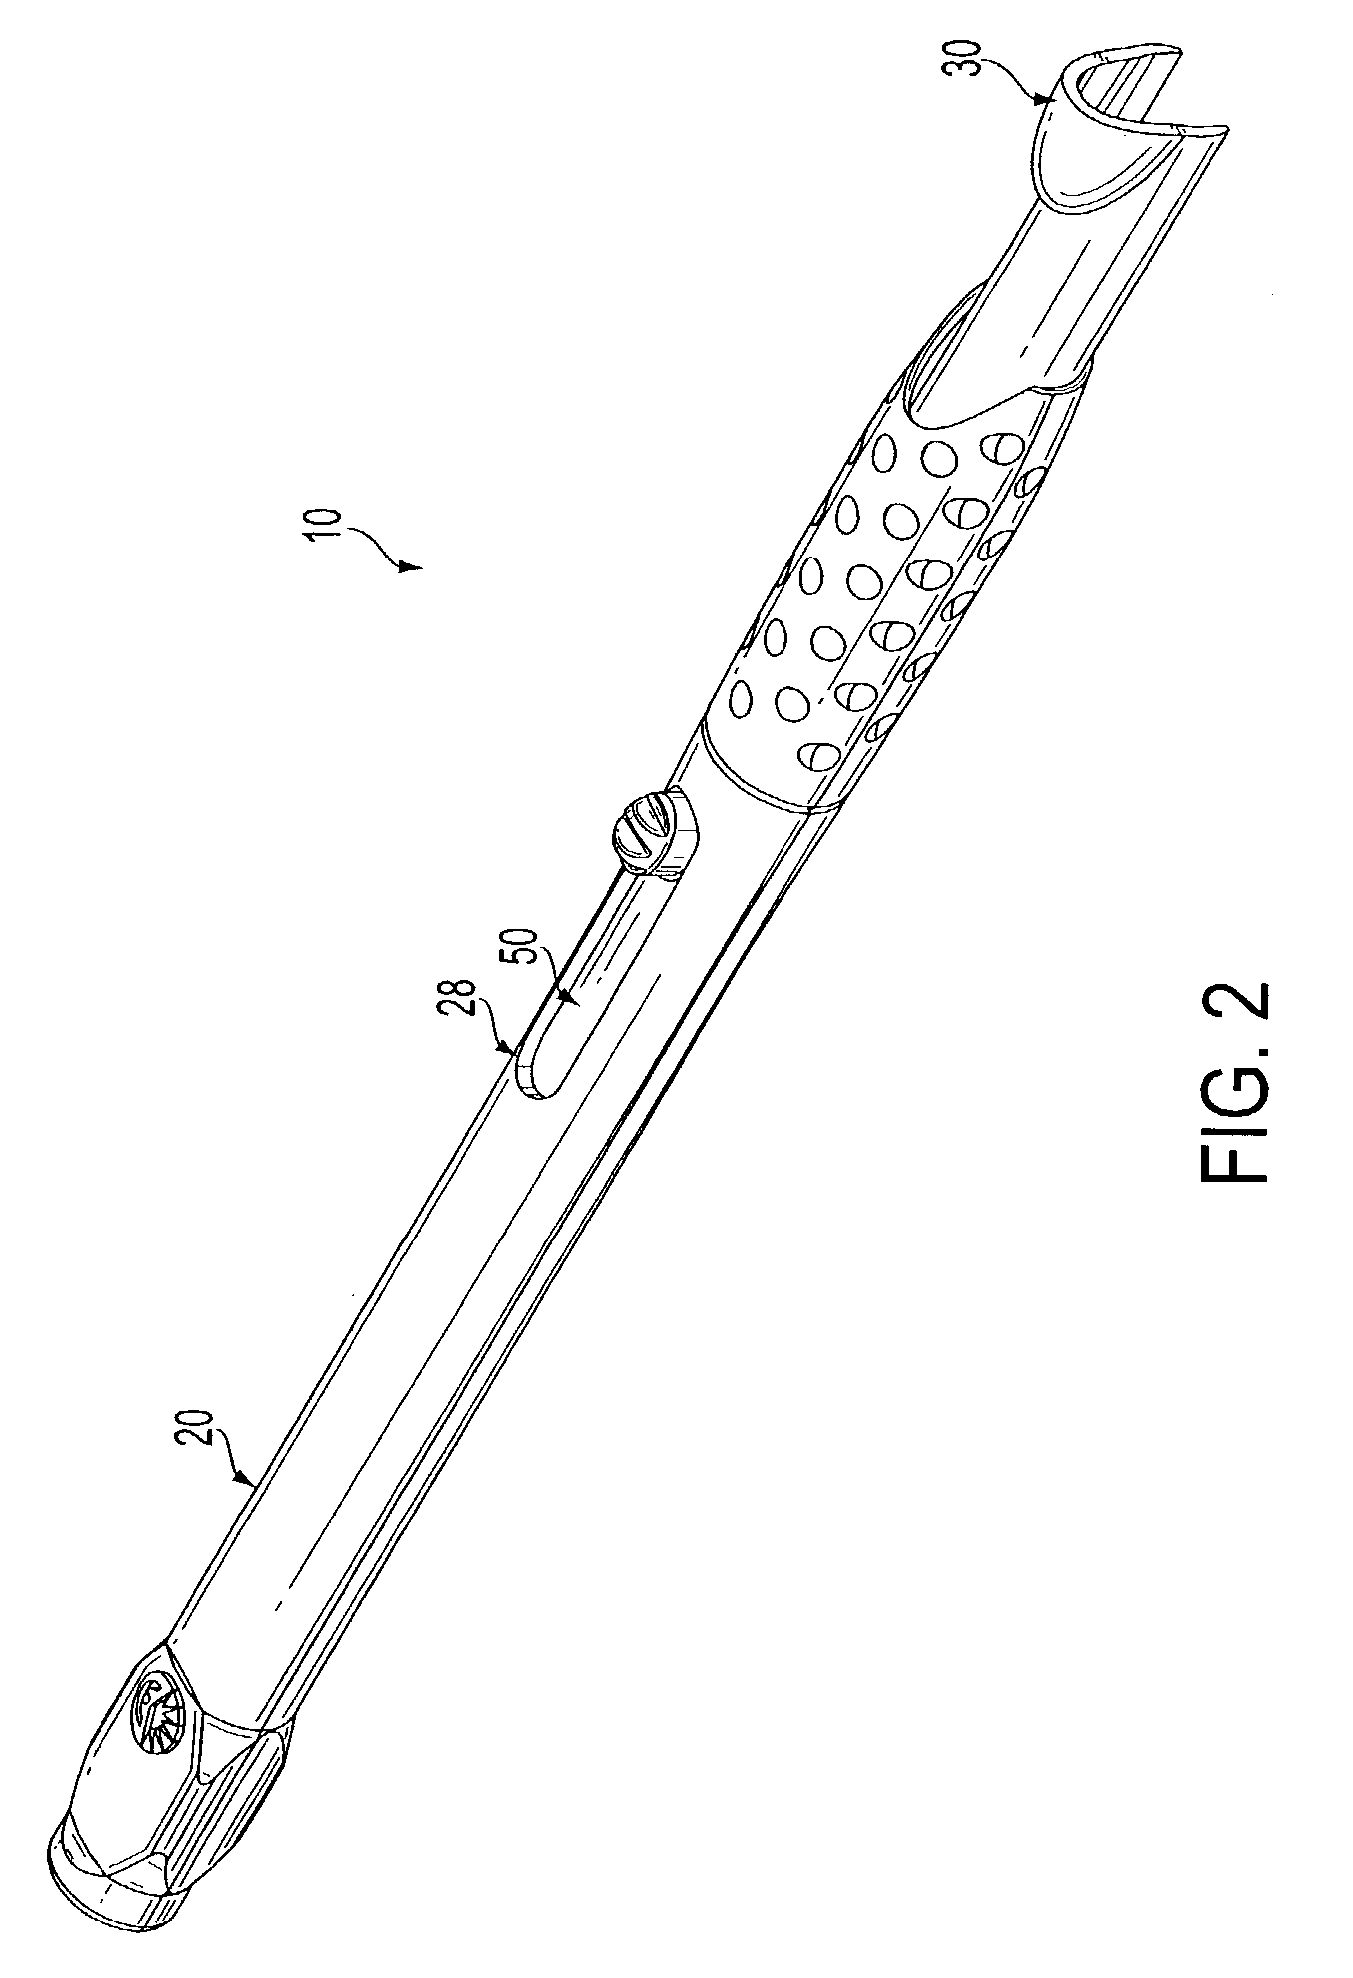 Surgical knife safety handle